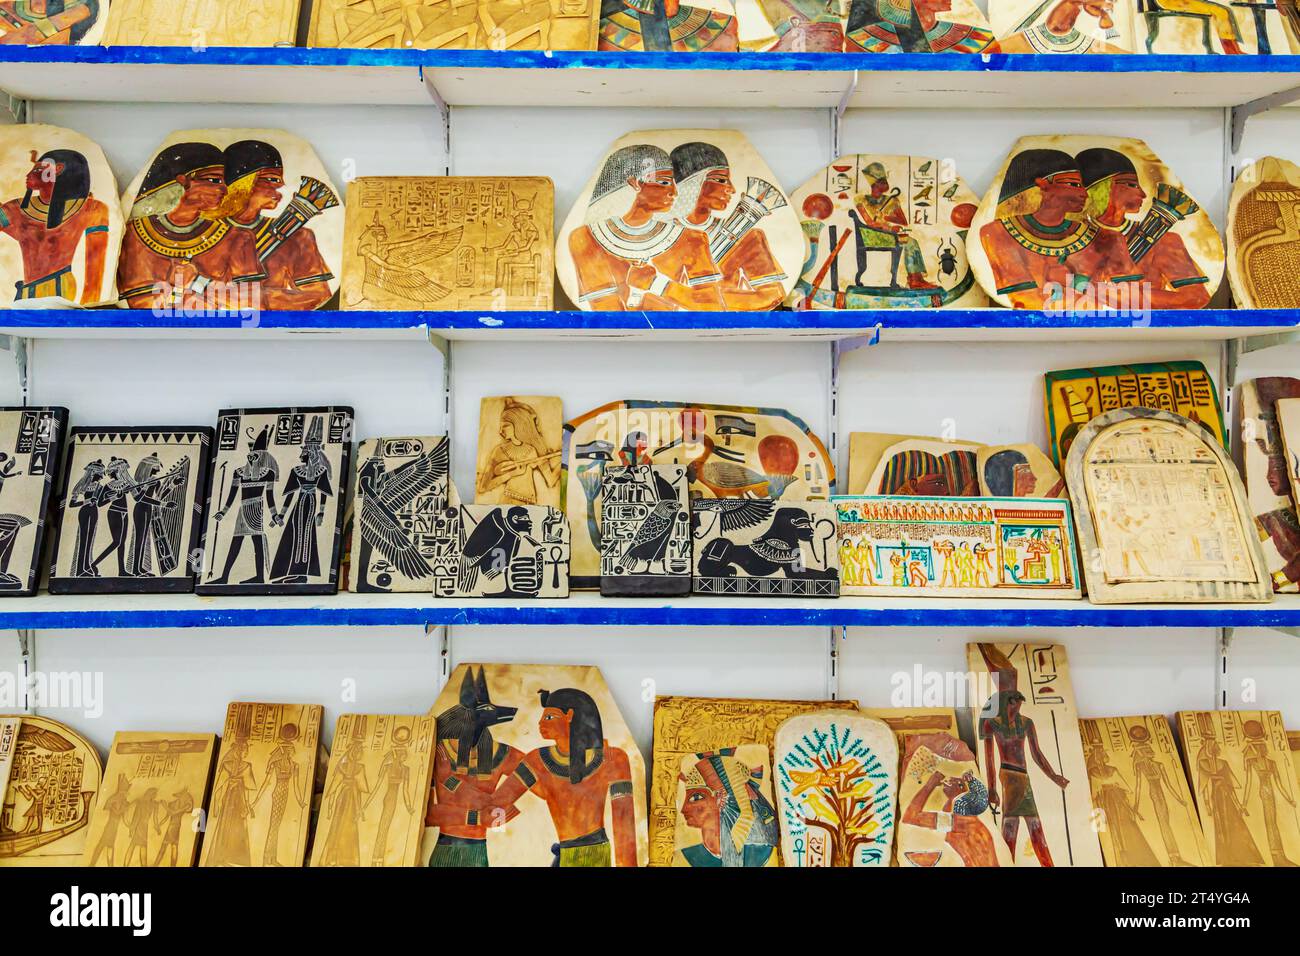 Alabaster factory products in the souvenir shop. Culture and traditions of Egypt. Luxor, Egypt - October 21, 2023. Stock Photo